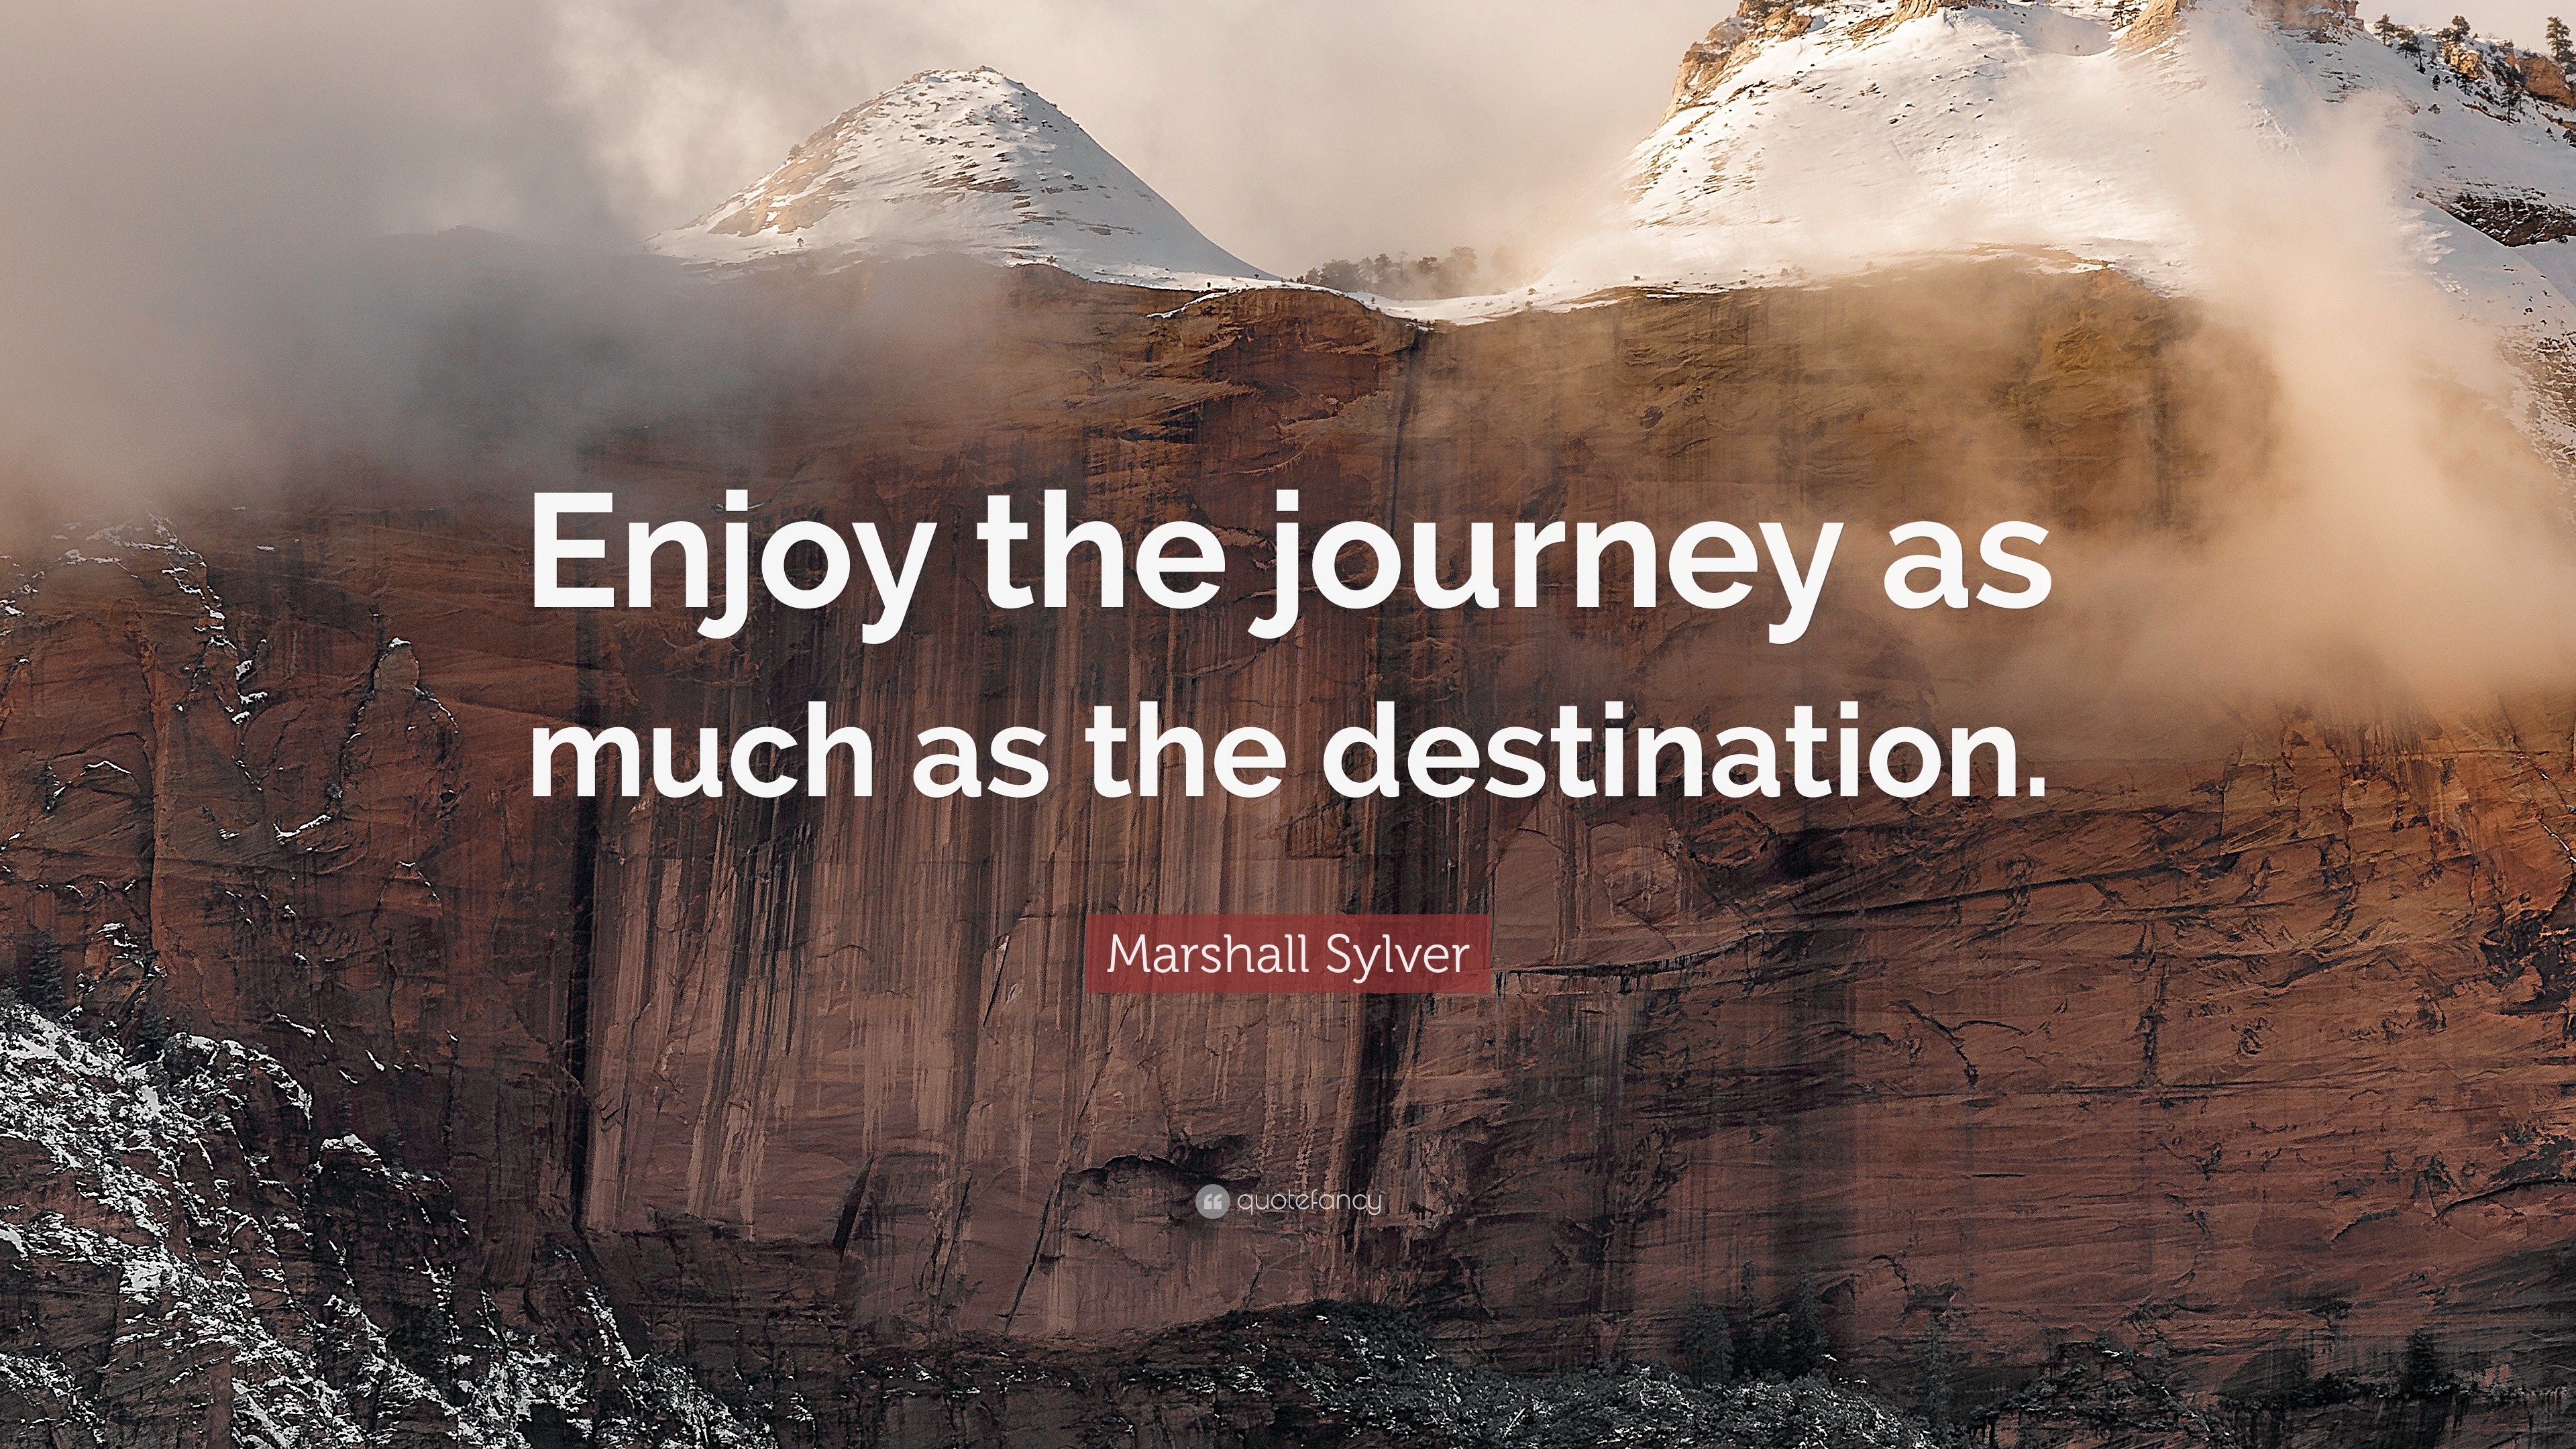 Marshall Sylver Quote: “Enjoy the journey as much as the destination.”